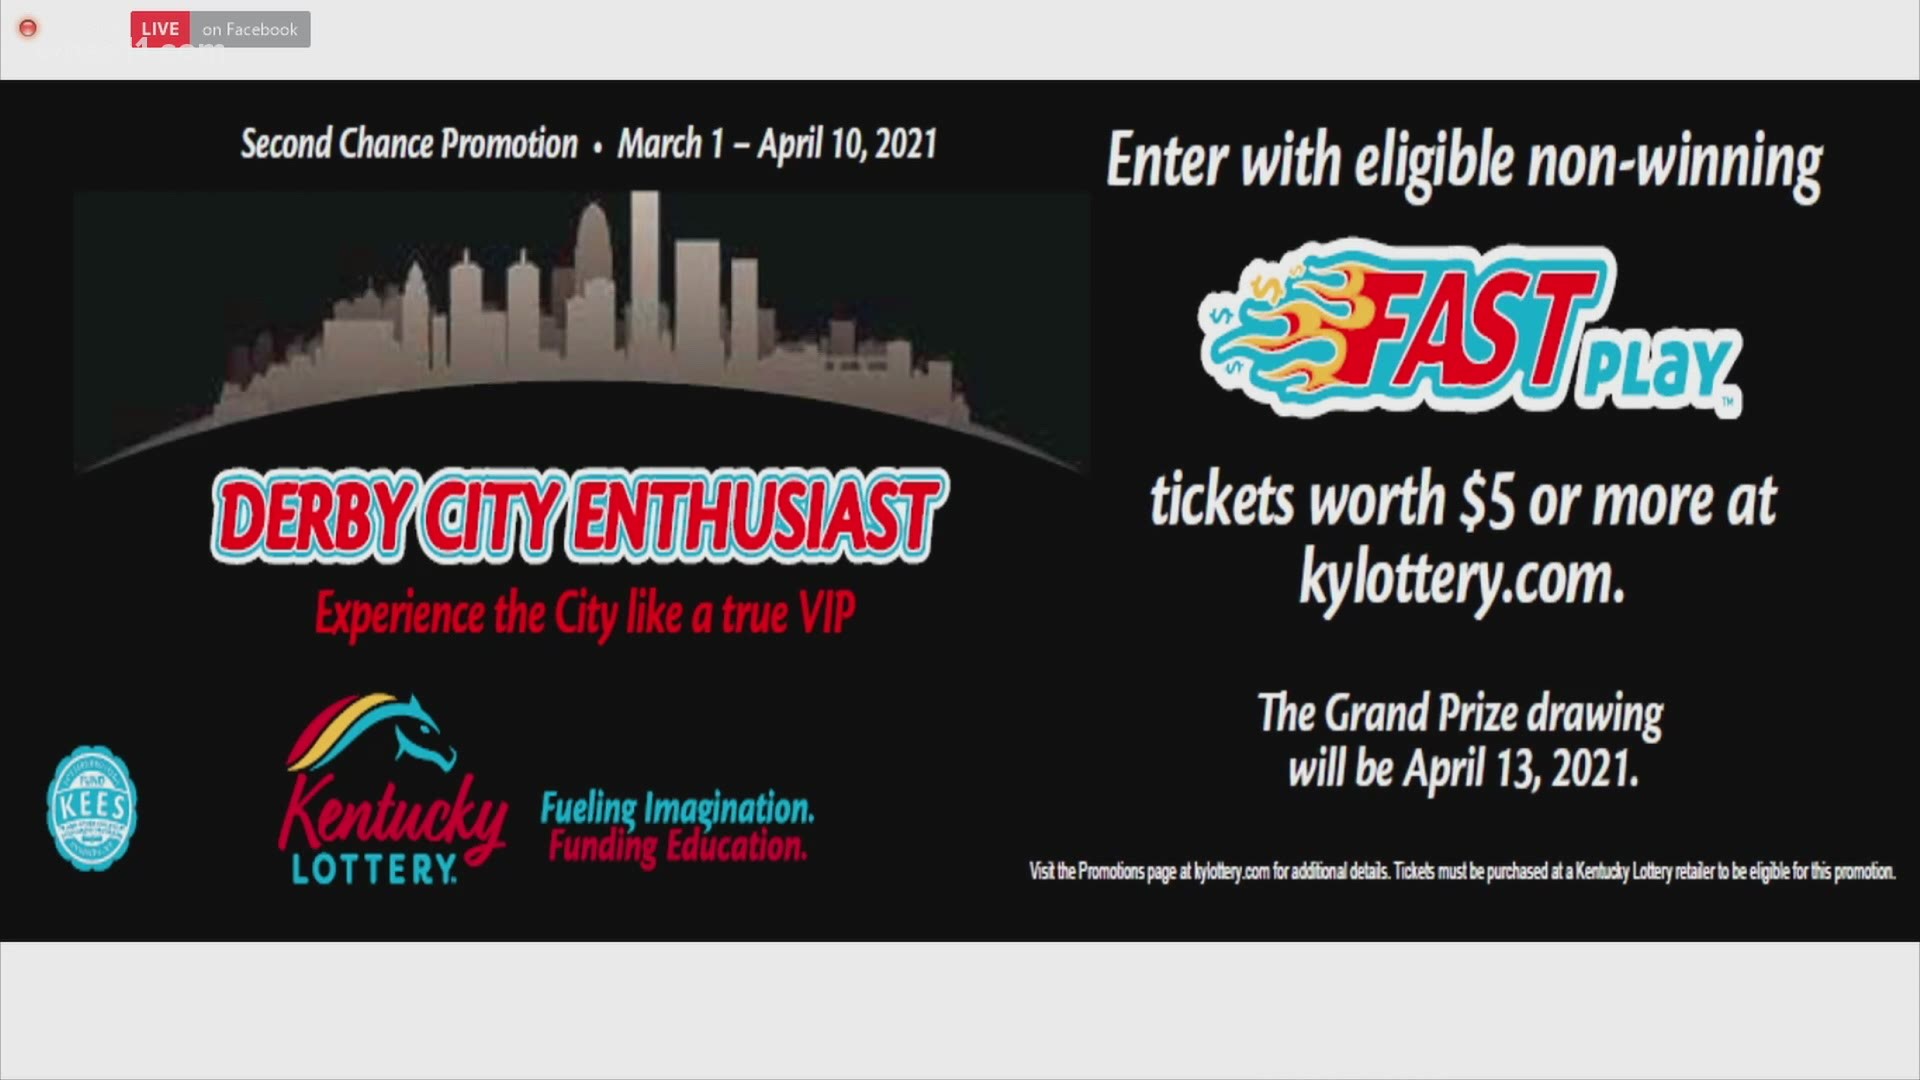 To register, players must enter a non-winning Fast Play Lottery ticket online. The prizes include a helicopter tour of the city and a tour of Churchill Downs.